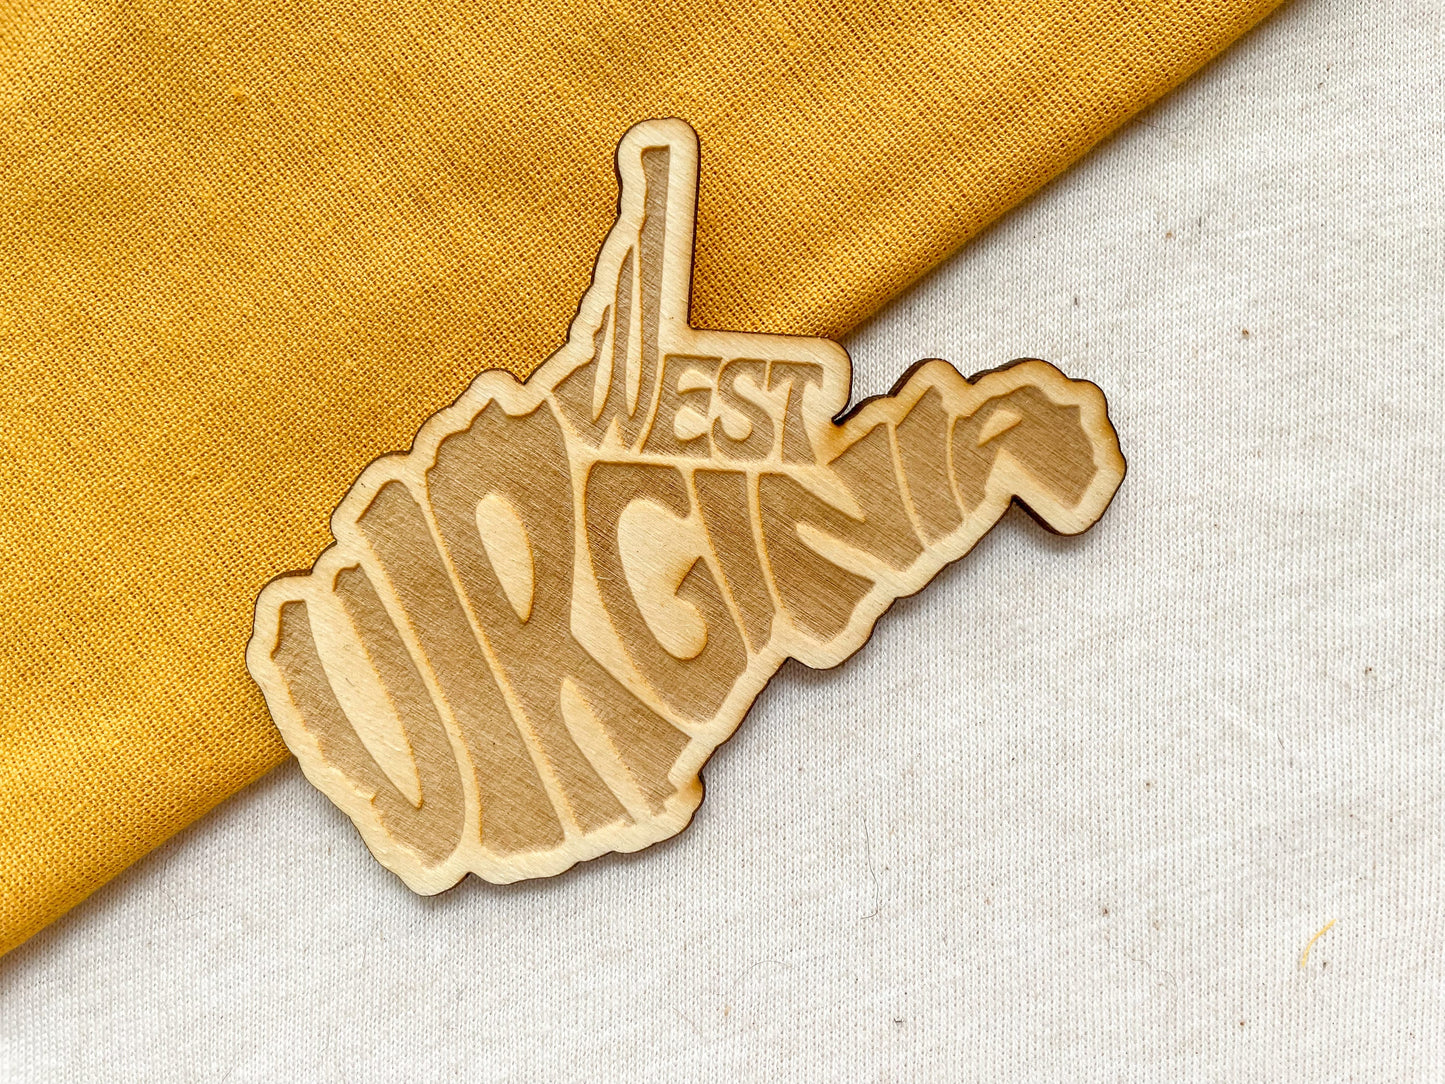 West Virginia State Name Magnet